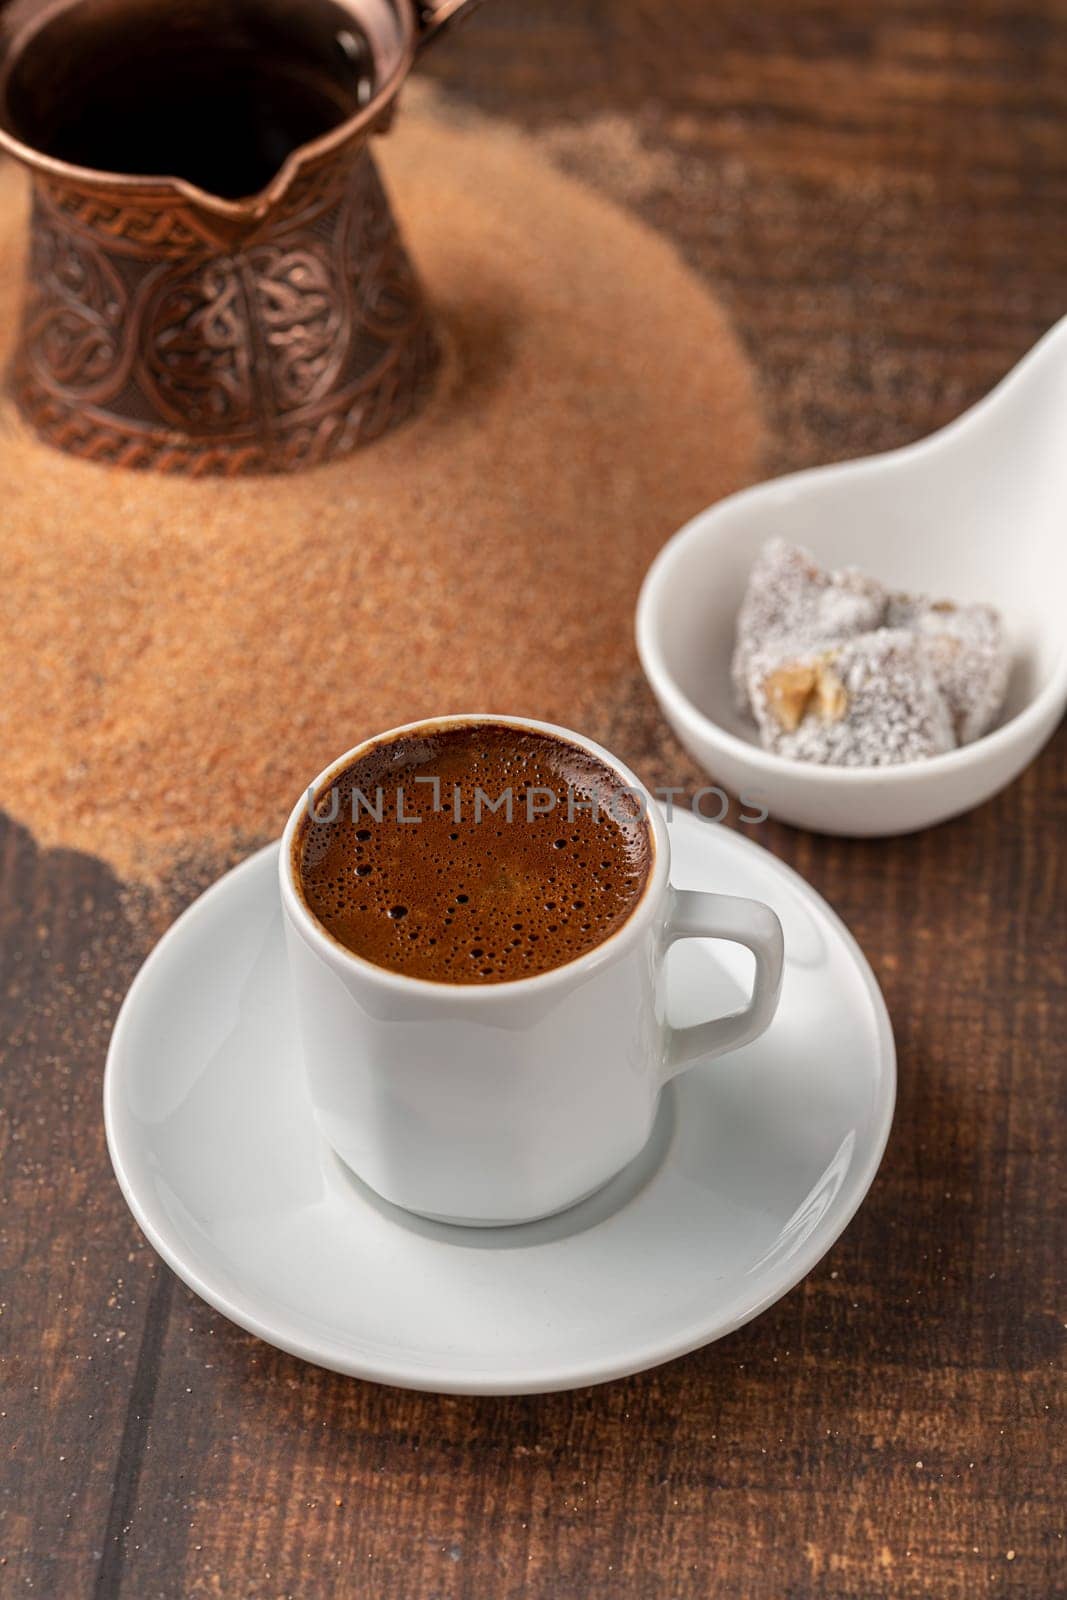 Turkish coffee cooked in hot sand with Turkish delight in a classic coffee cup by Sonat